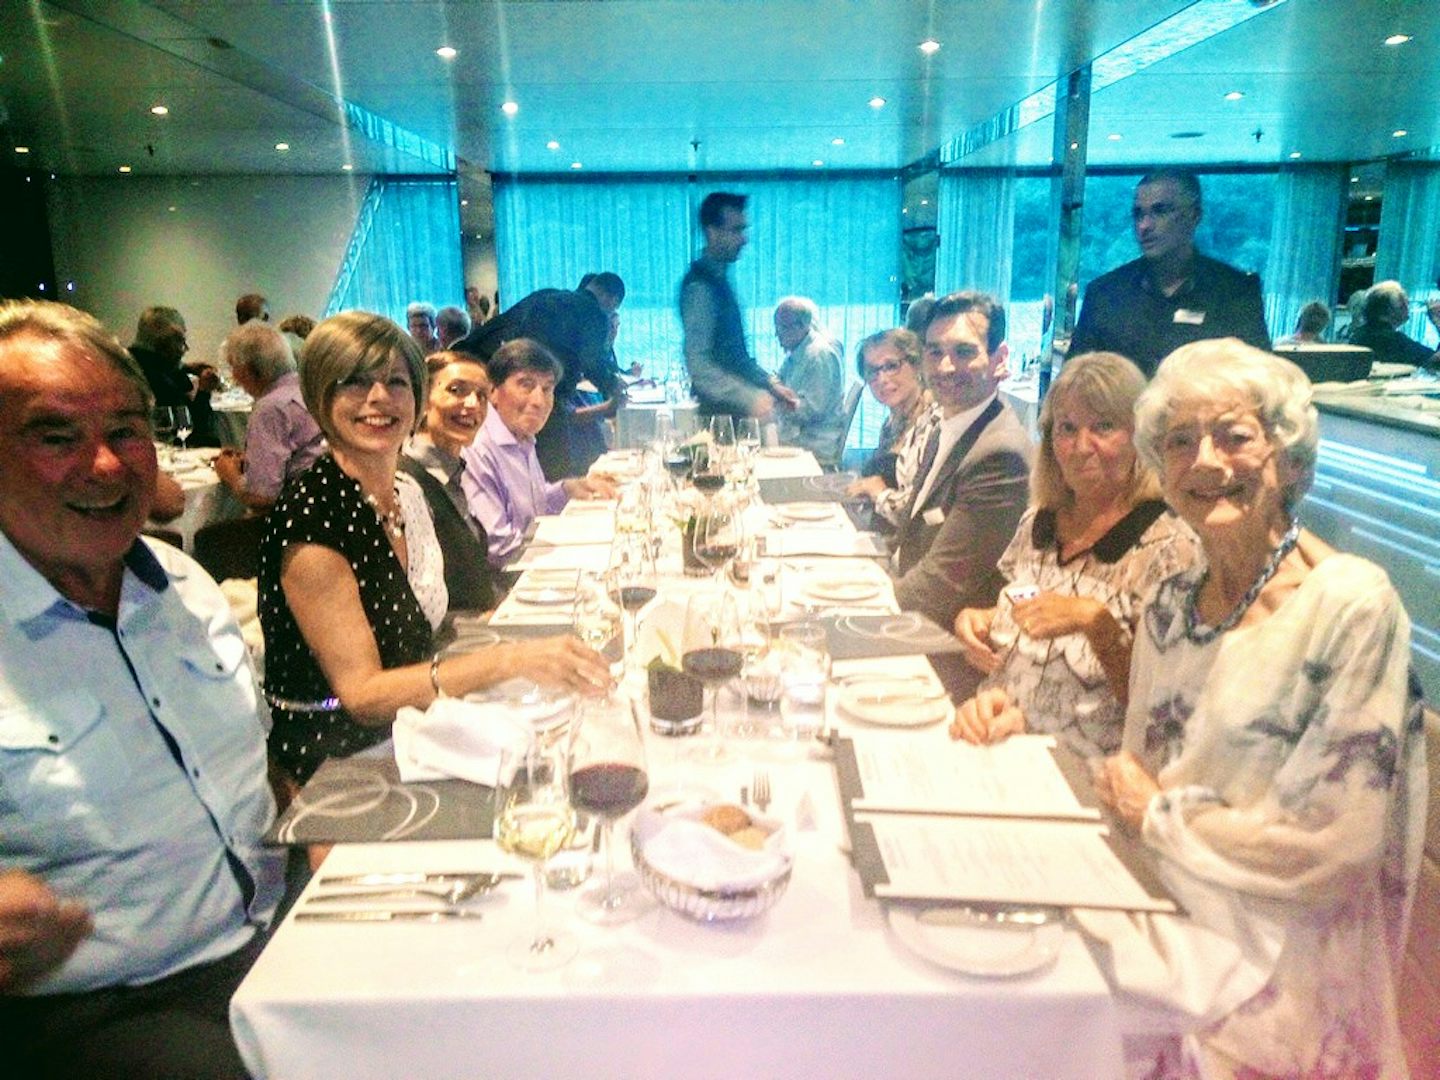 Dinner on board, international blend of table companions, superb food and w